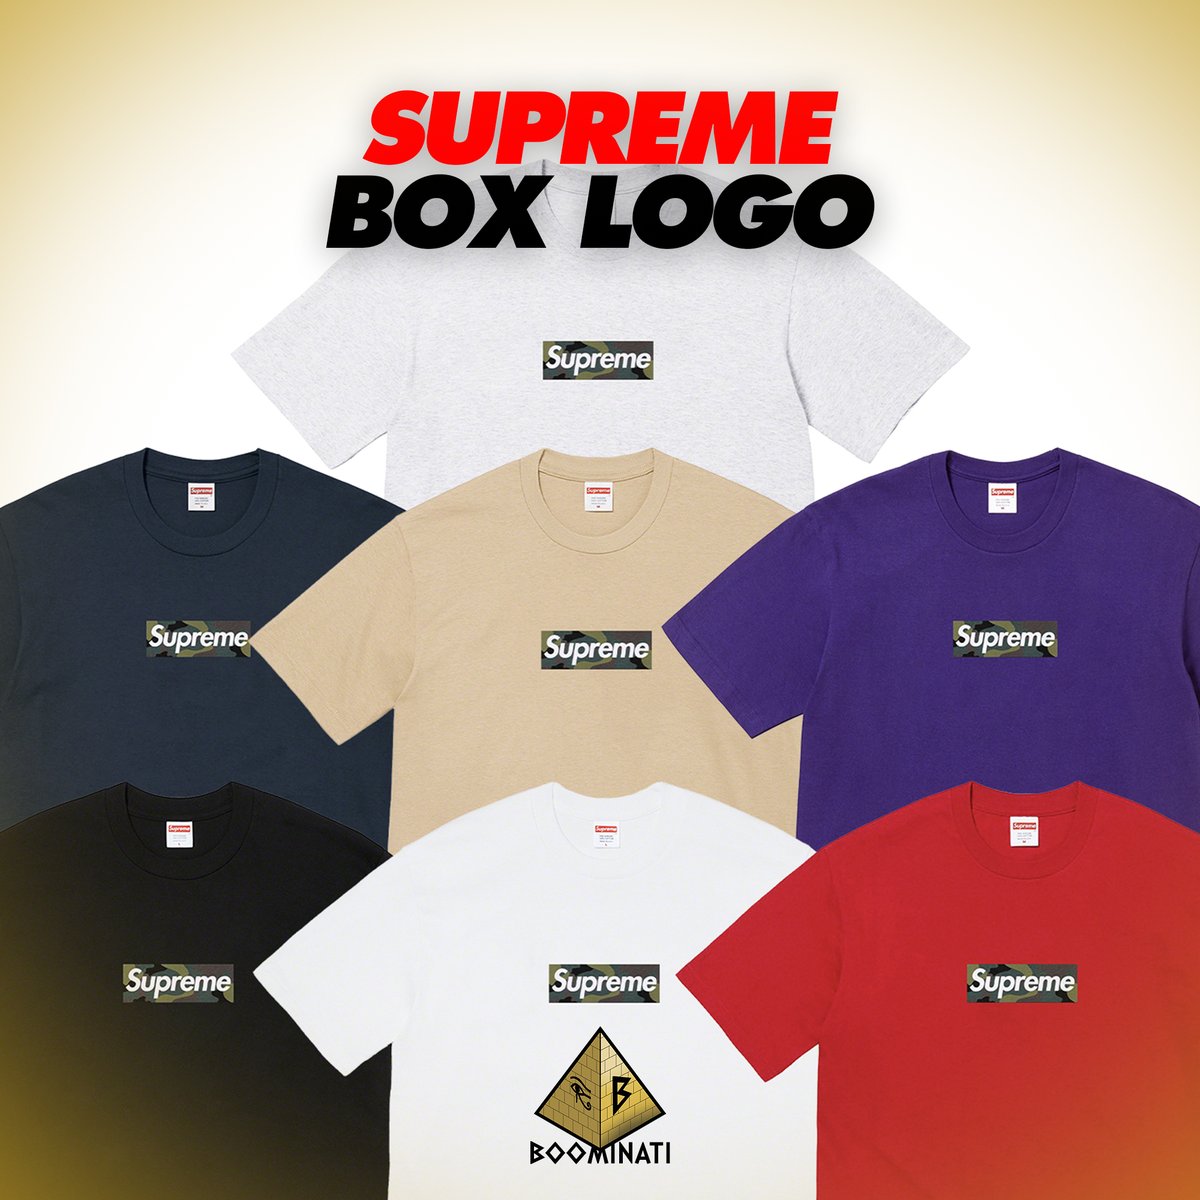 Supreme Box Logo season is not over yet 😳 Tomorrow, the new Supreme Box Logo t-shirts will be releasing! What is your favorite color? 🔥